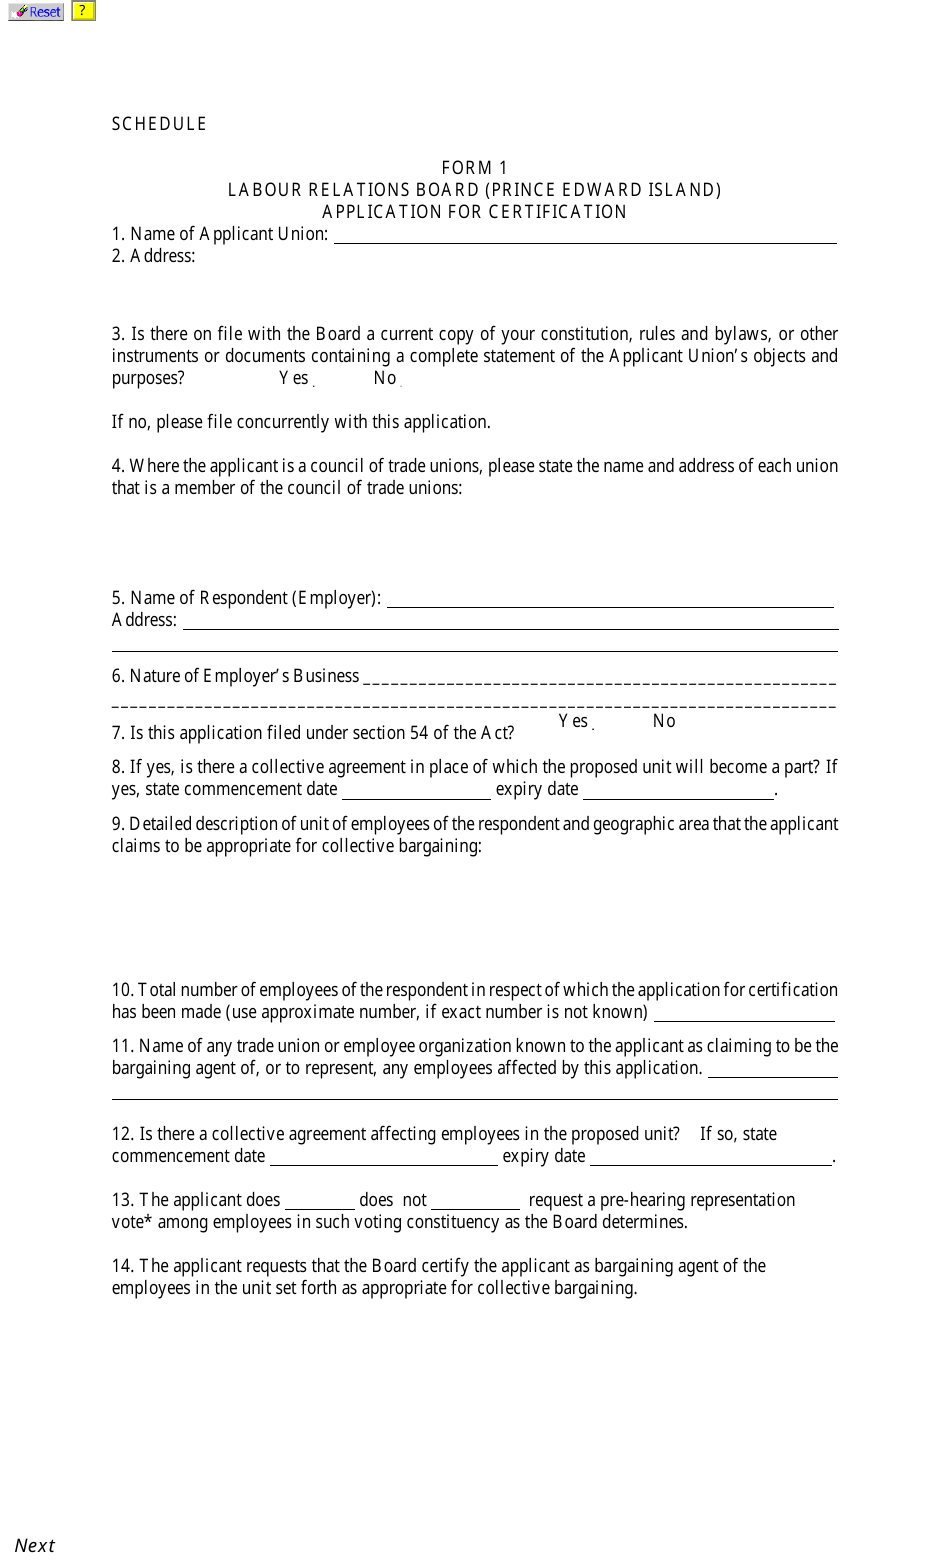 Form 1 Application for Certification - Prince Edward Island, Canada, Page 1